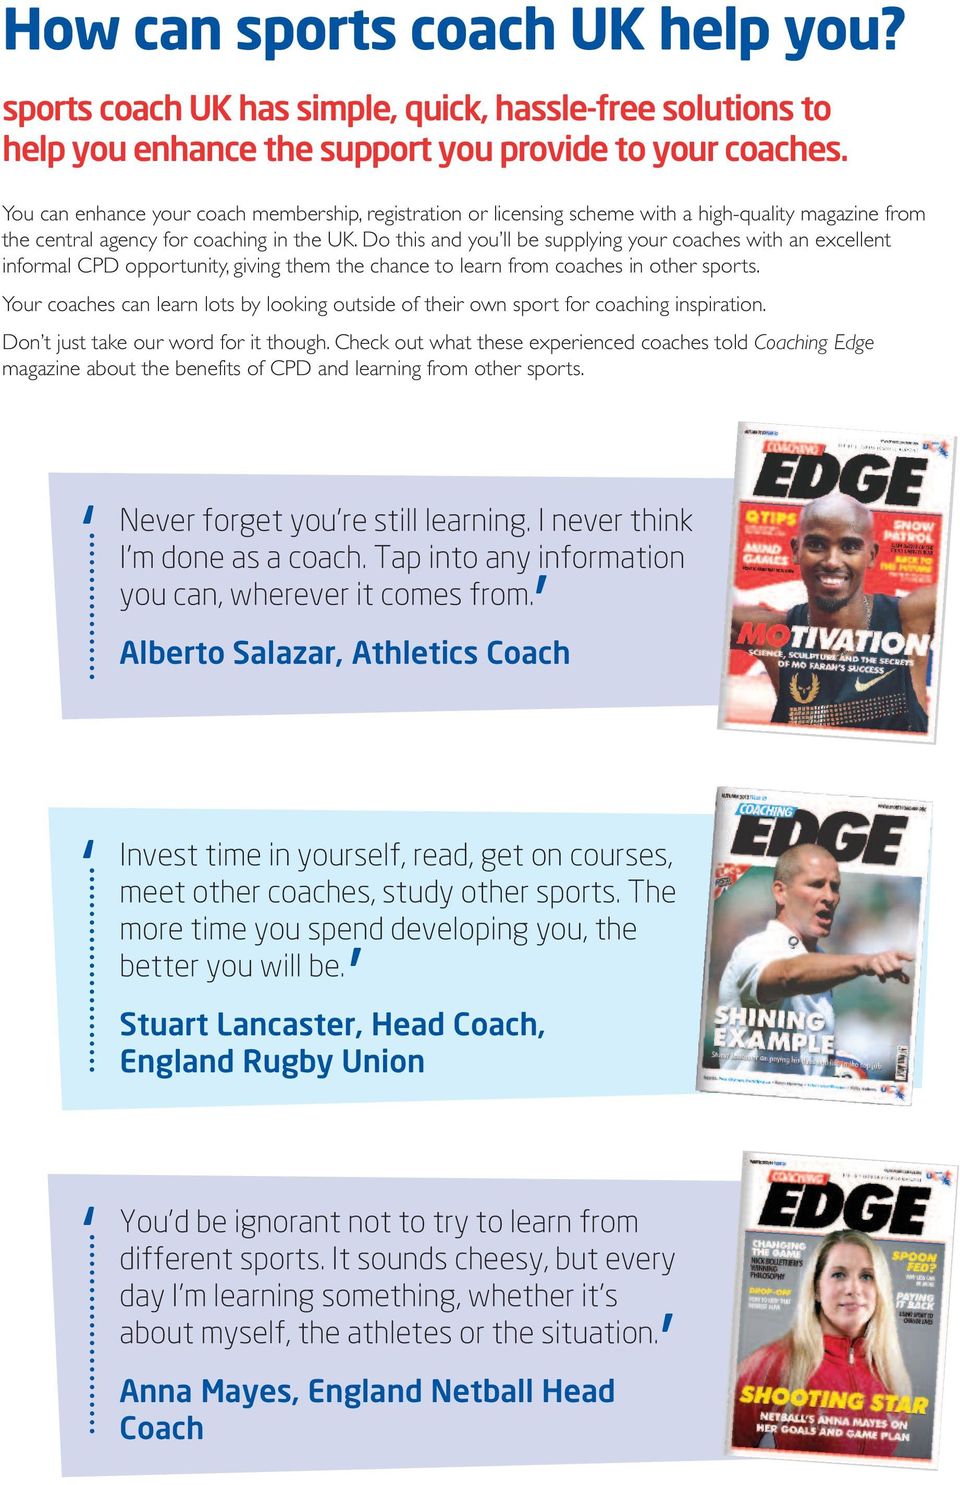 Do this and you ll be supplying your coaches with an excellent informal CPD opportunity, giving them the chance to learn from coaches in other sports.